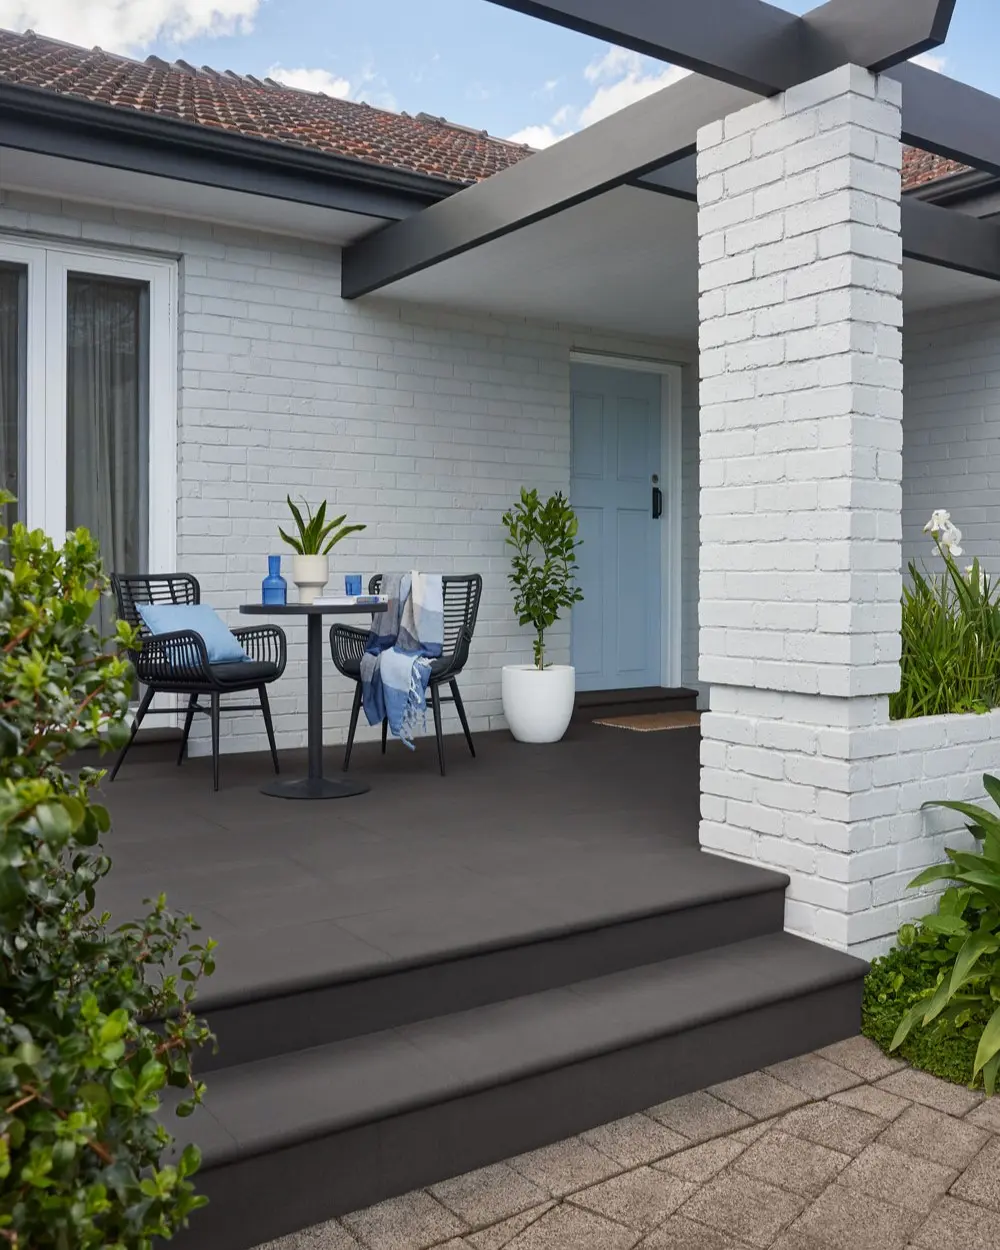 Pavers painted grey at patio entry of a white brick house.